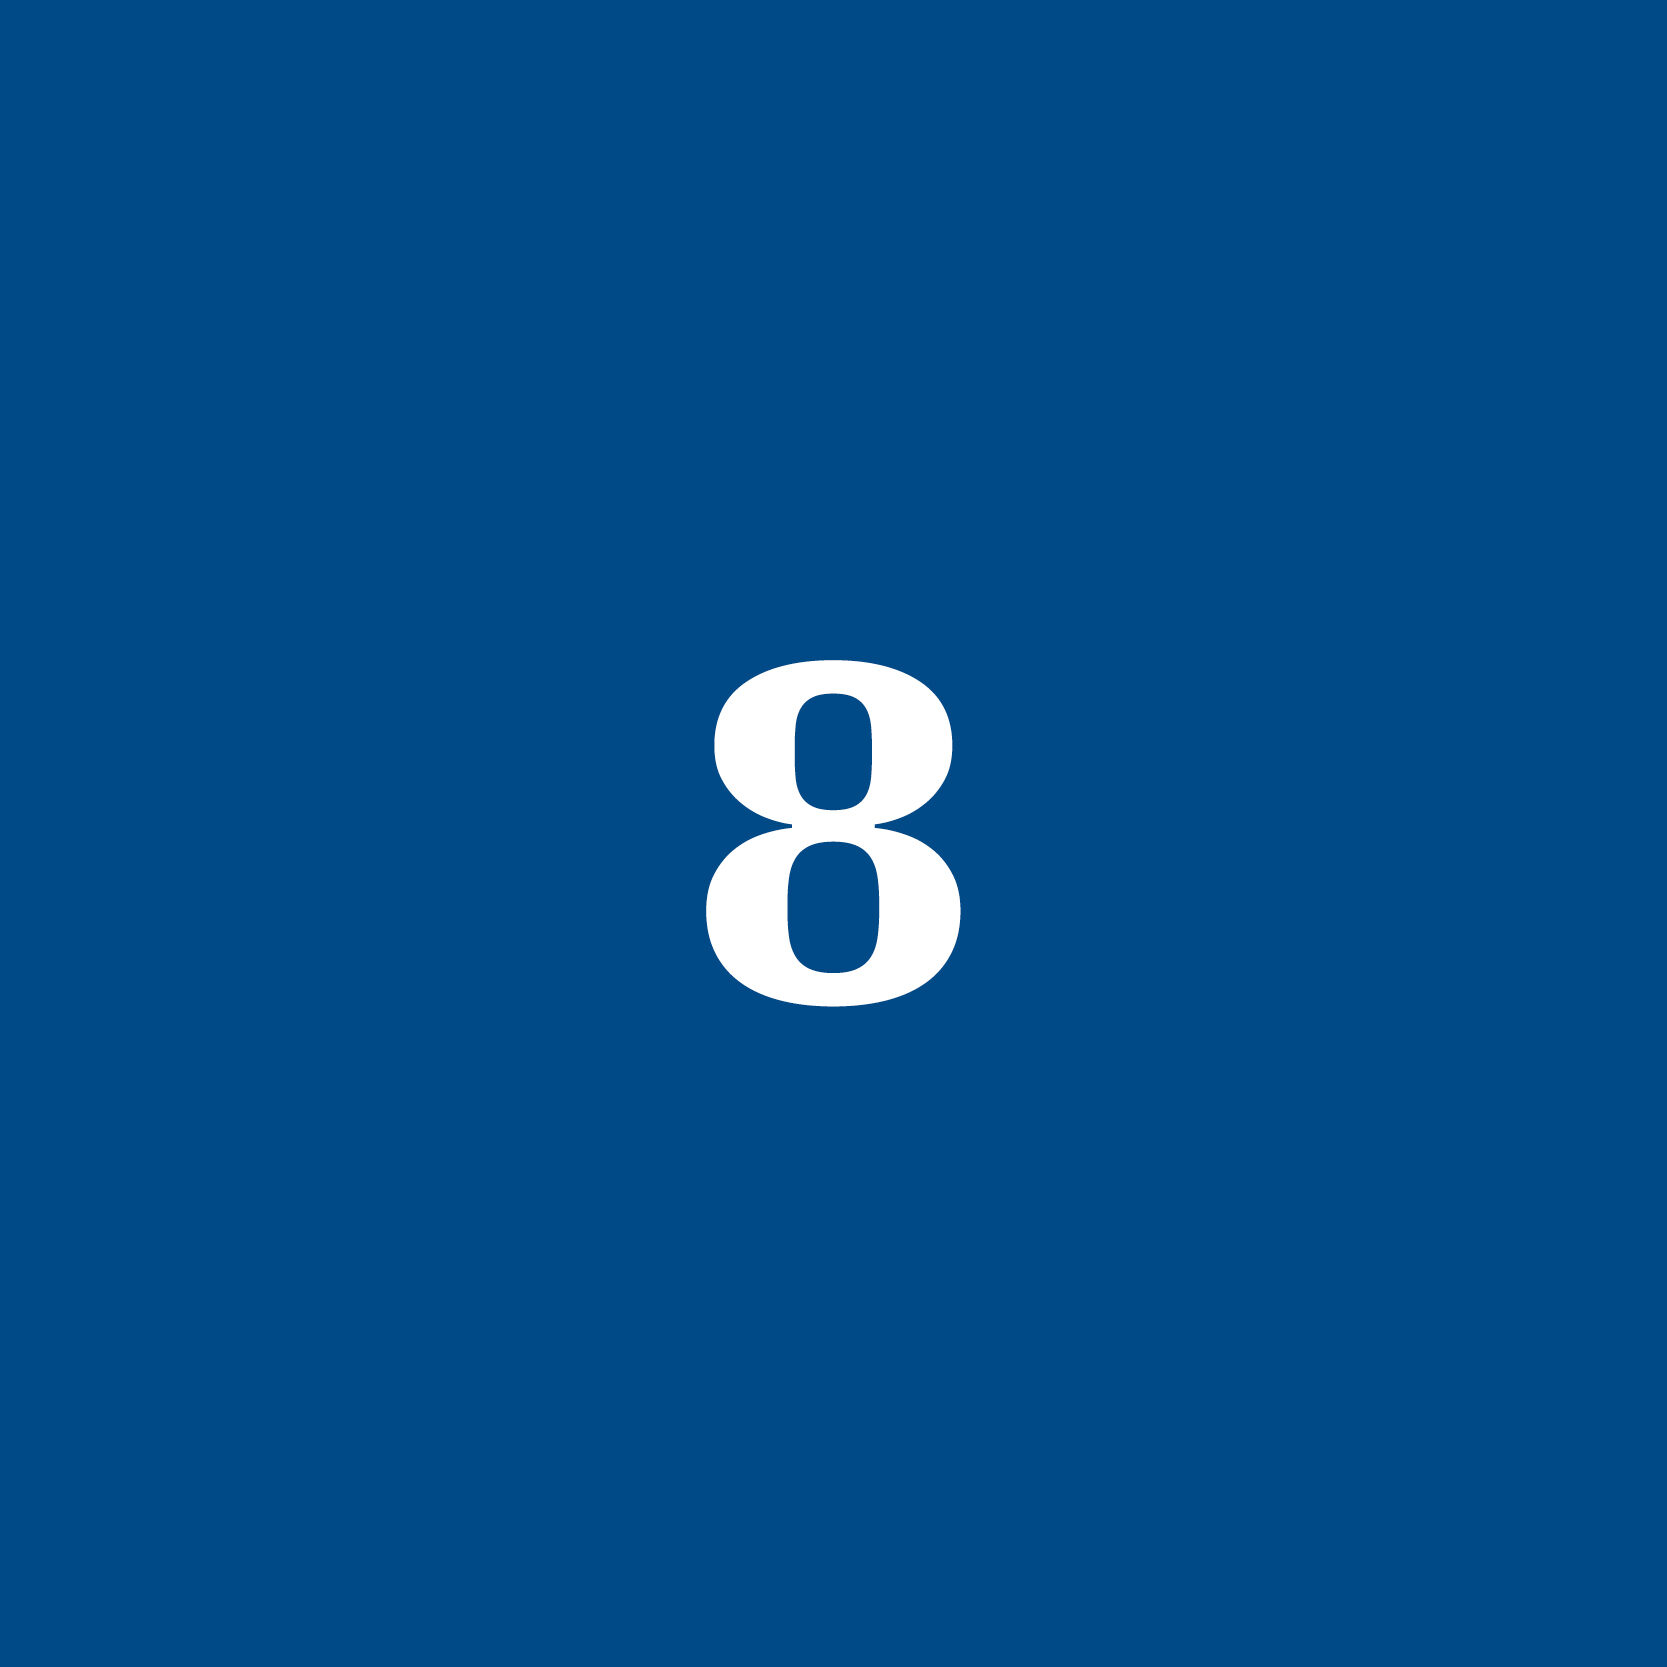 Blue background with a white number 8